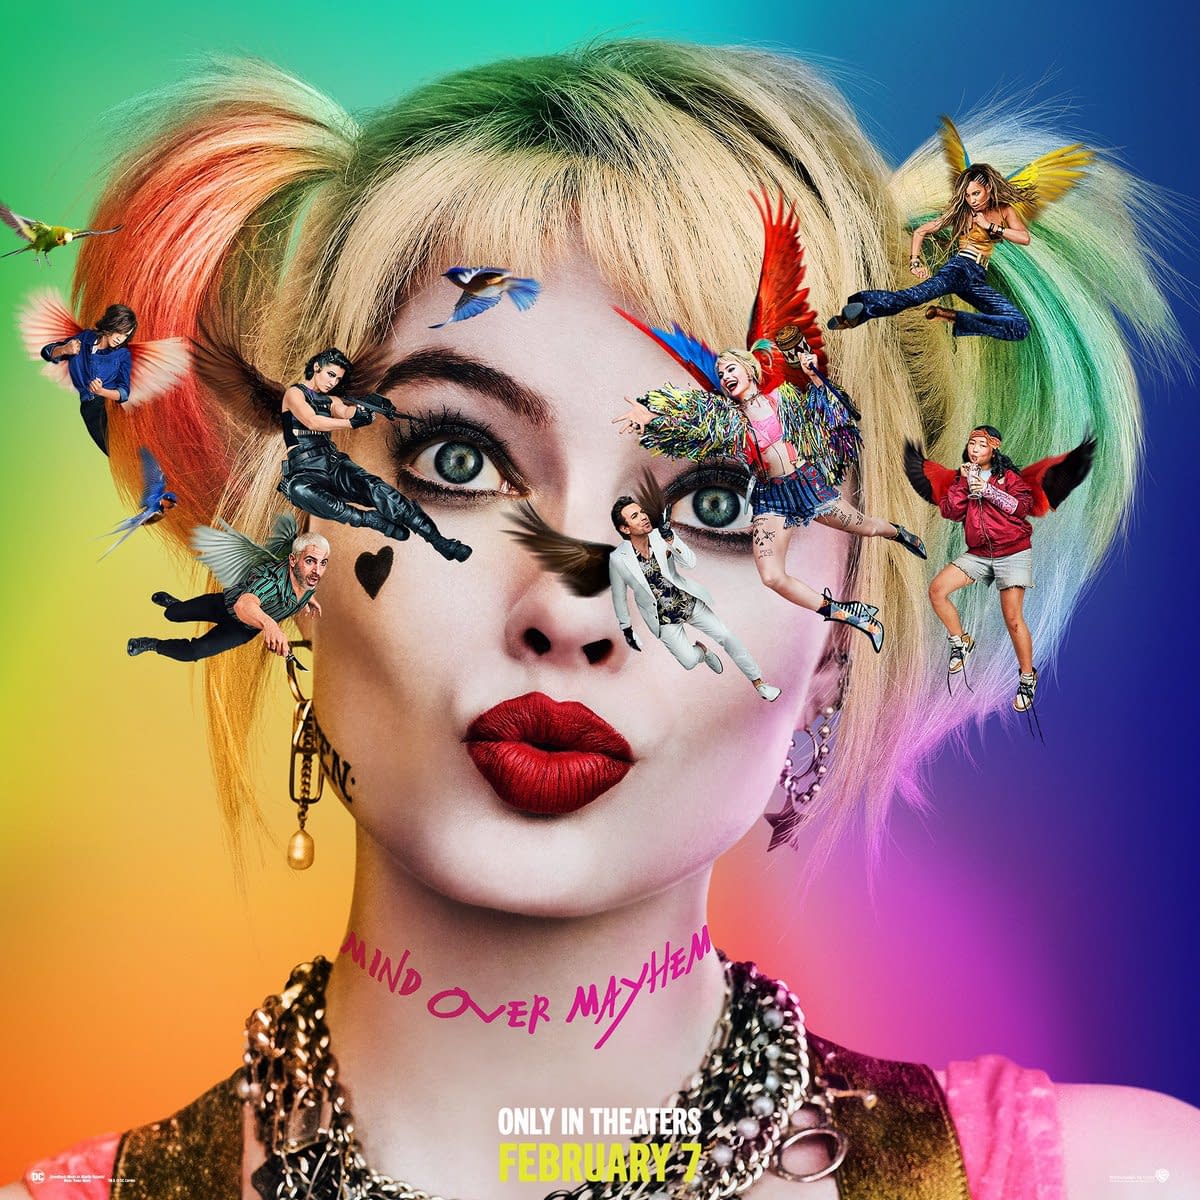 5 New Posters and Promo Art for "Birds of Prey"